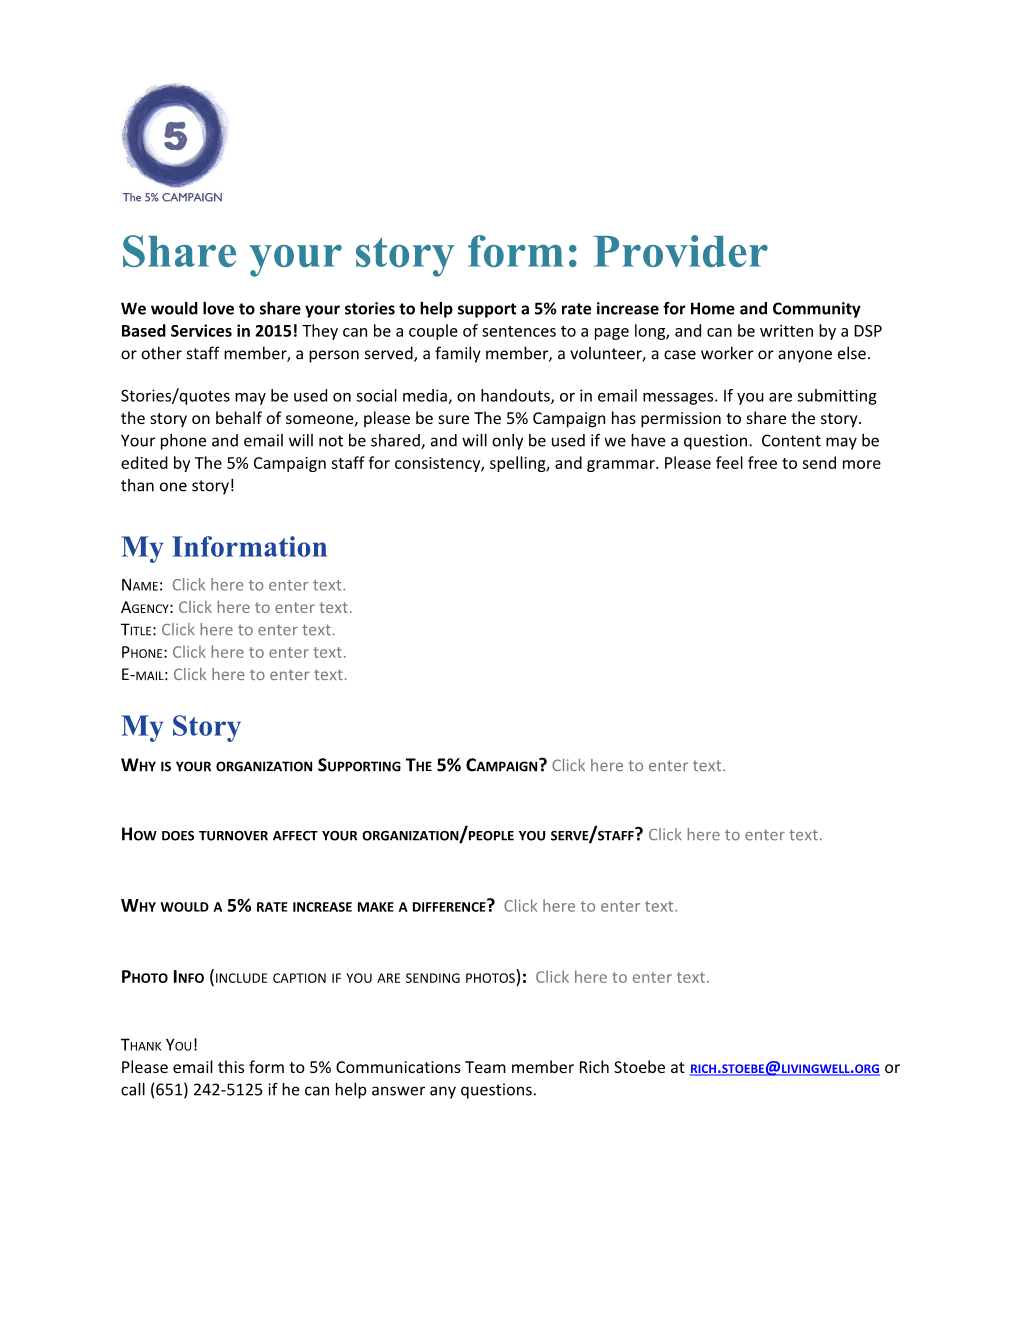 Share Your Story Form: Provider